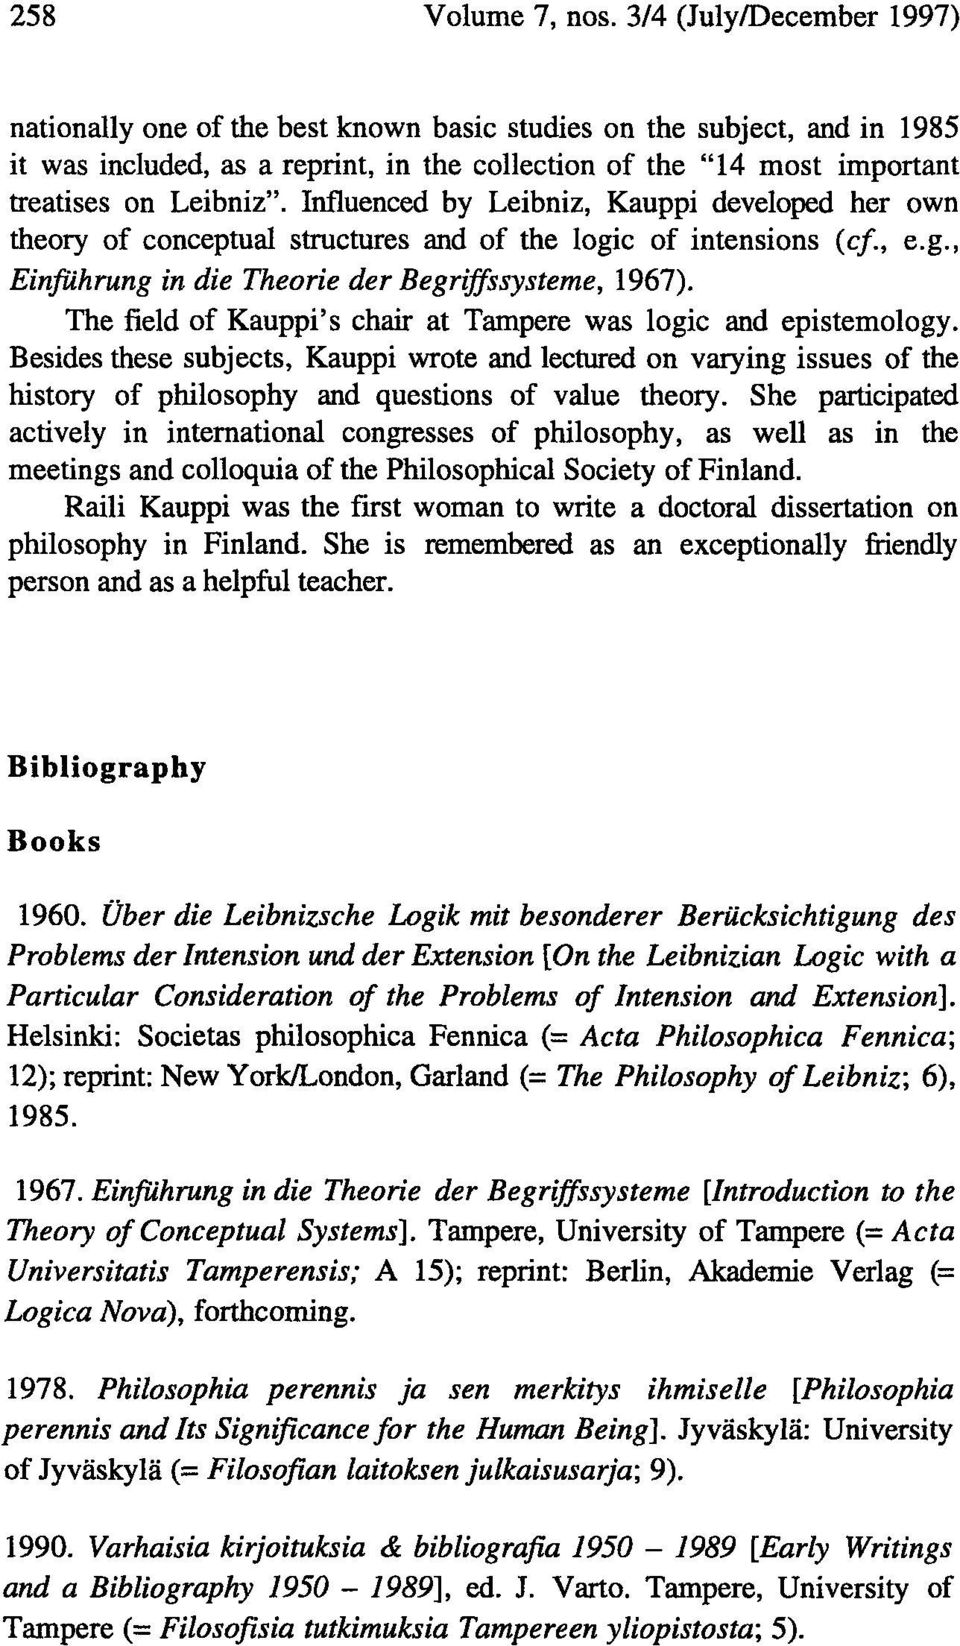 Influenced by Leibniz, Kauppi developed her own theory of conceptual structures and of the logic of intensions {cf., e.g., Einfiihrung in die Theorie der Begriffssysteme, 1967).